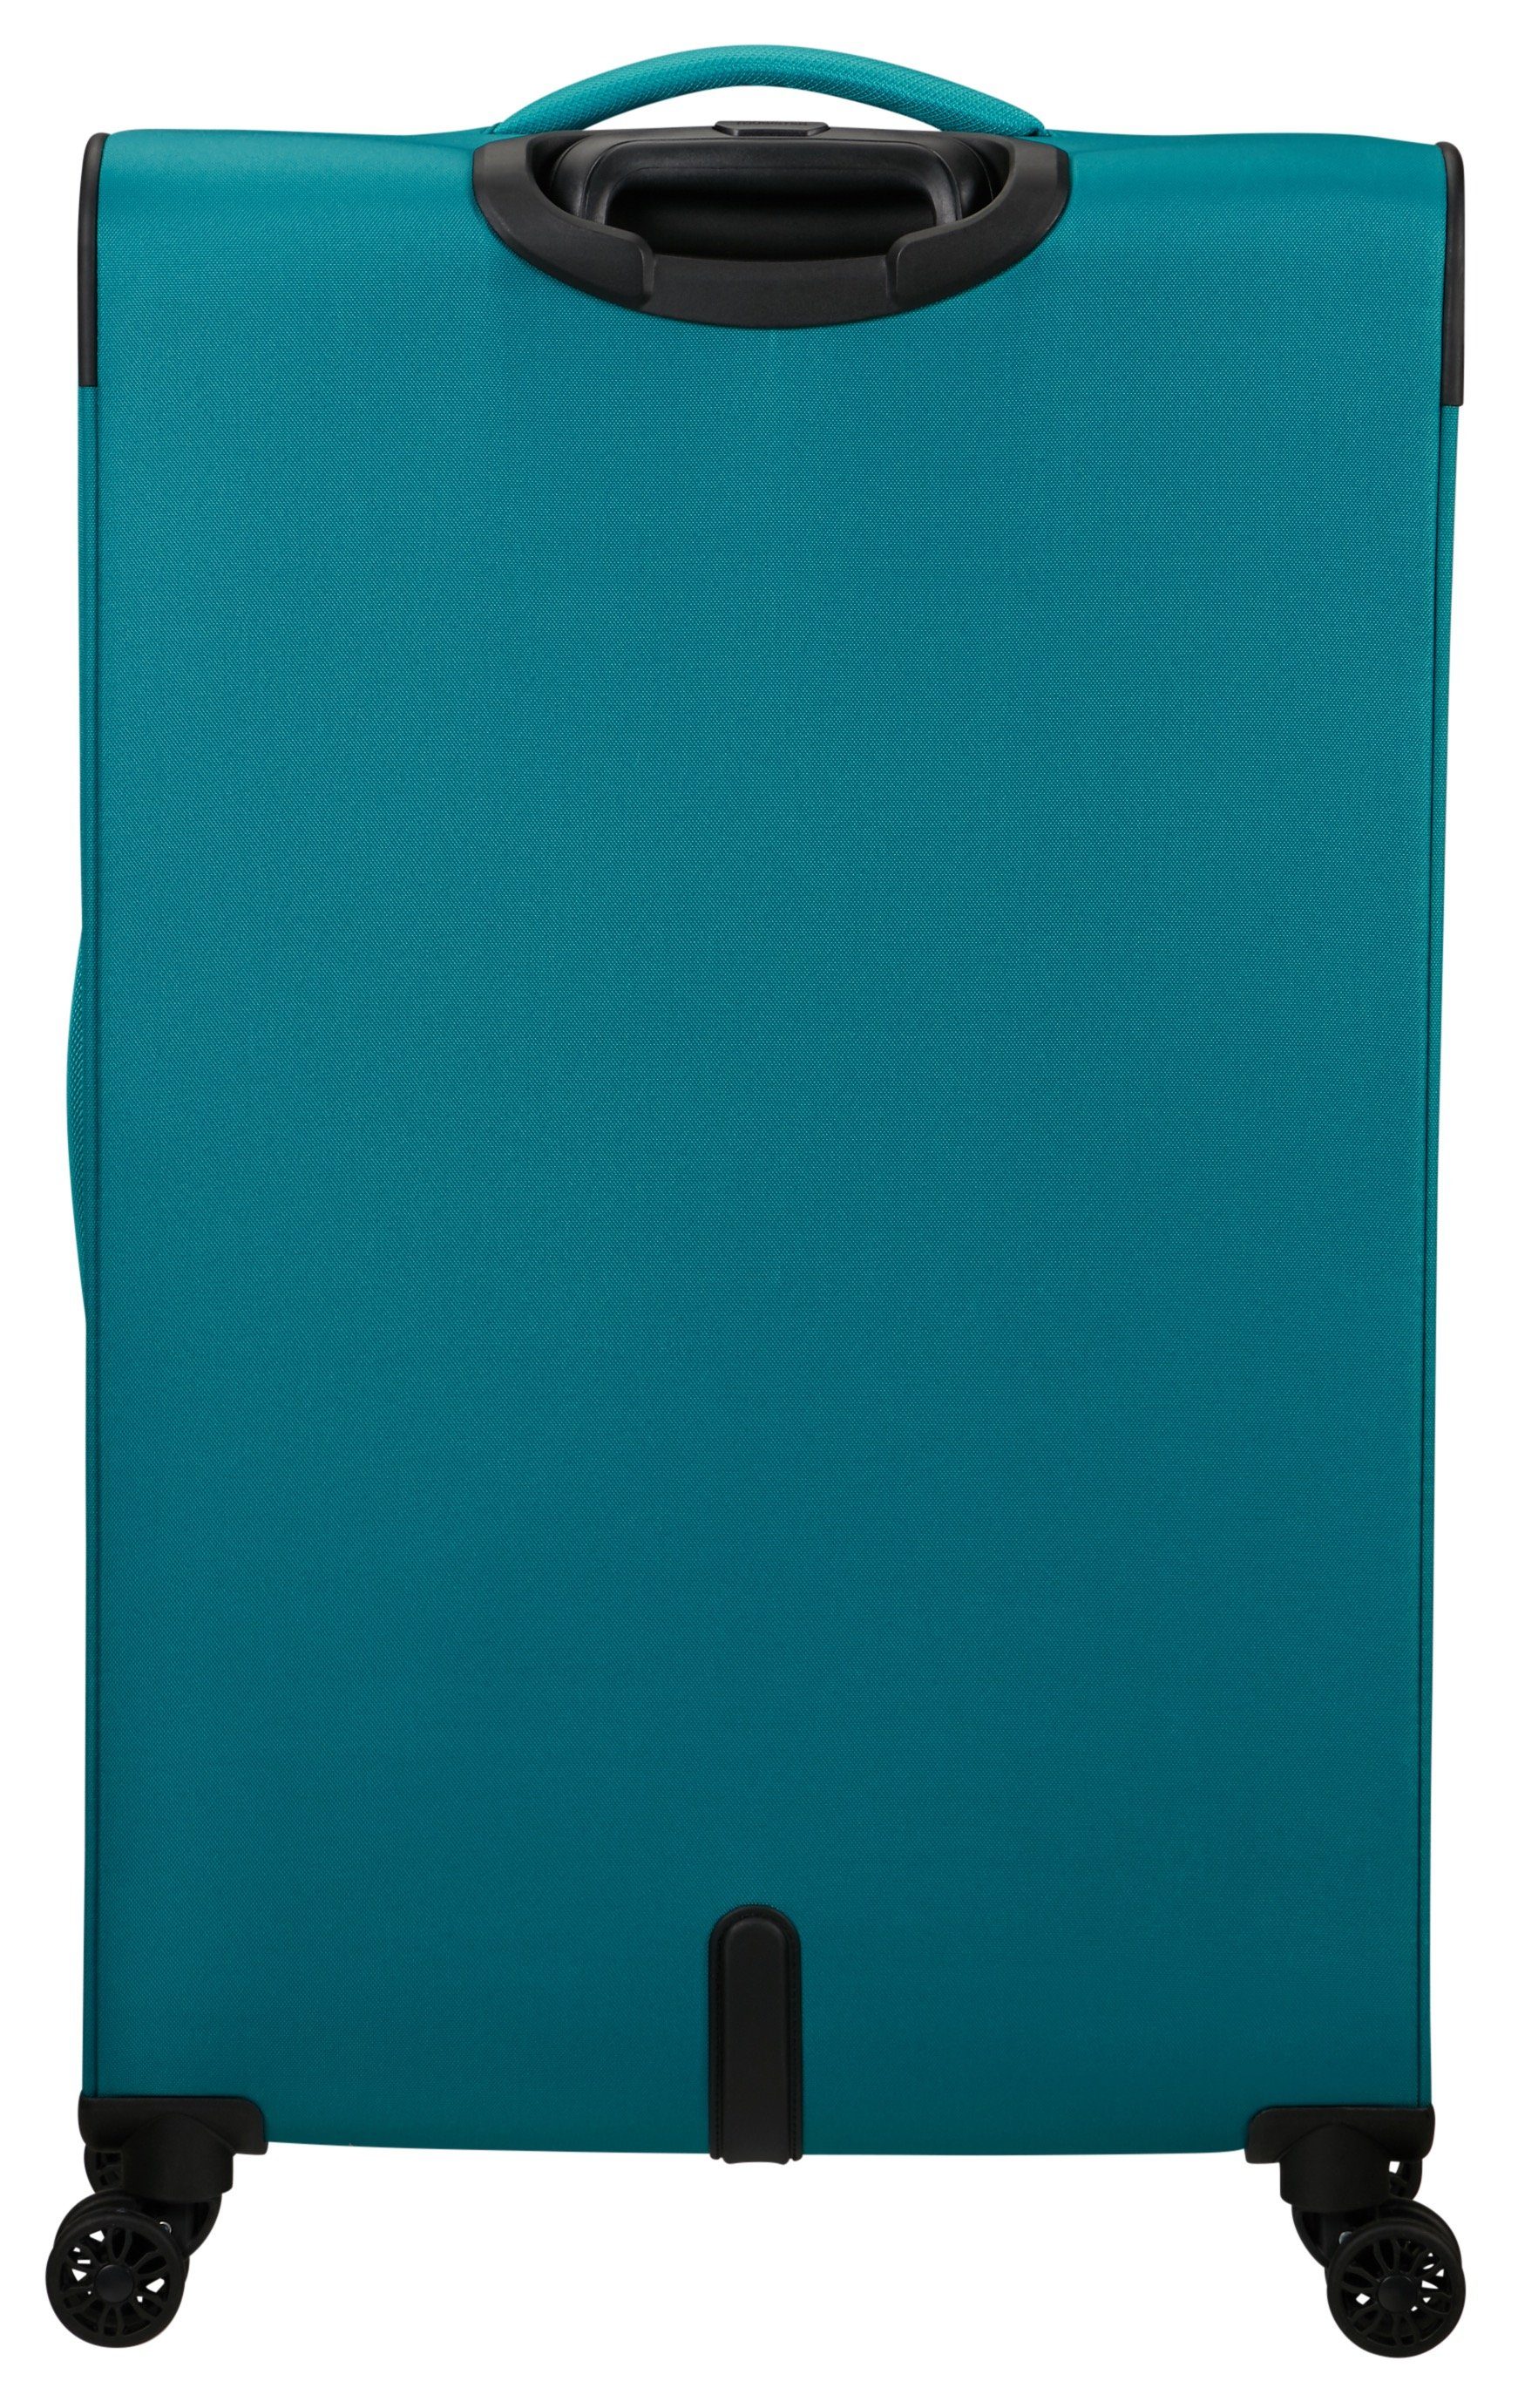 Koffer American stone PULSONIC Tourister® teal 80, 4 Spinner Rollen